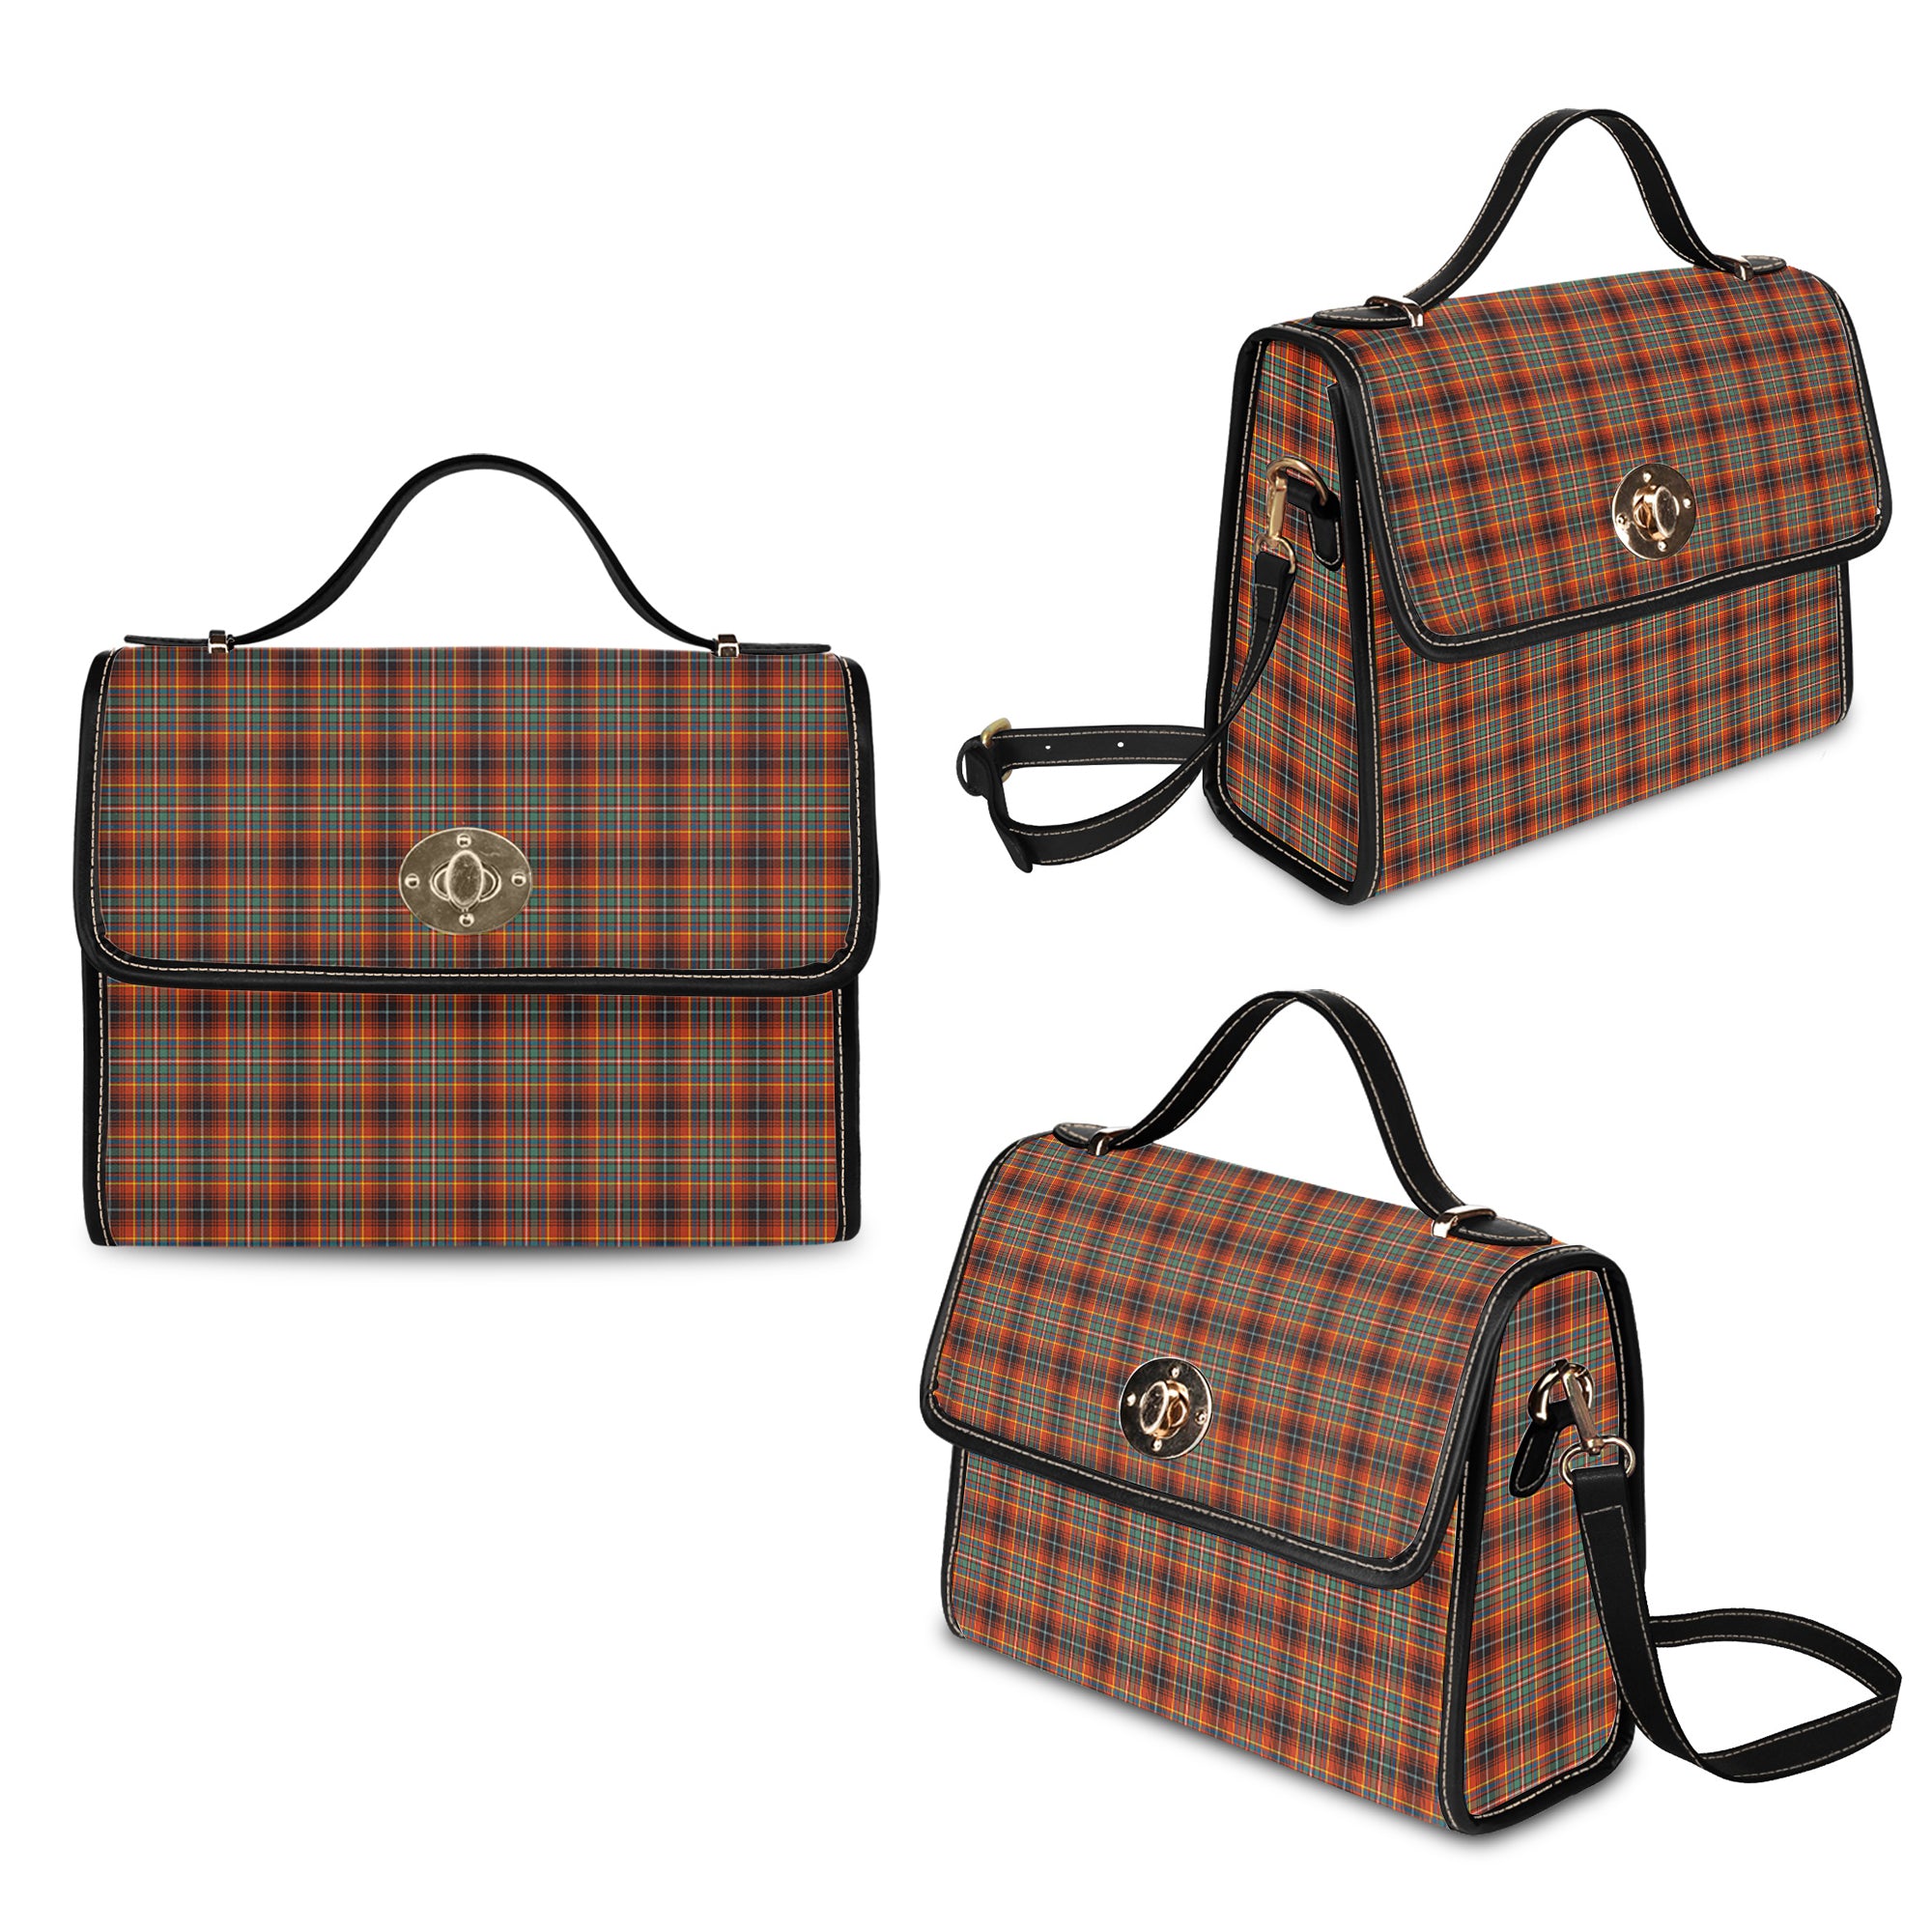 innes-ancient-tartan-canvas-bag-with-leather-shoulder-strap